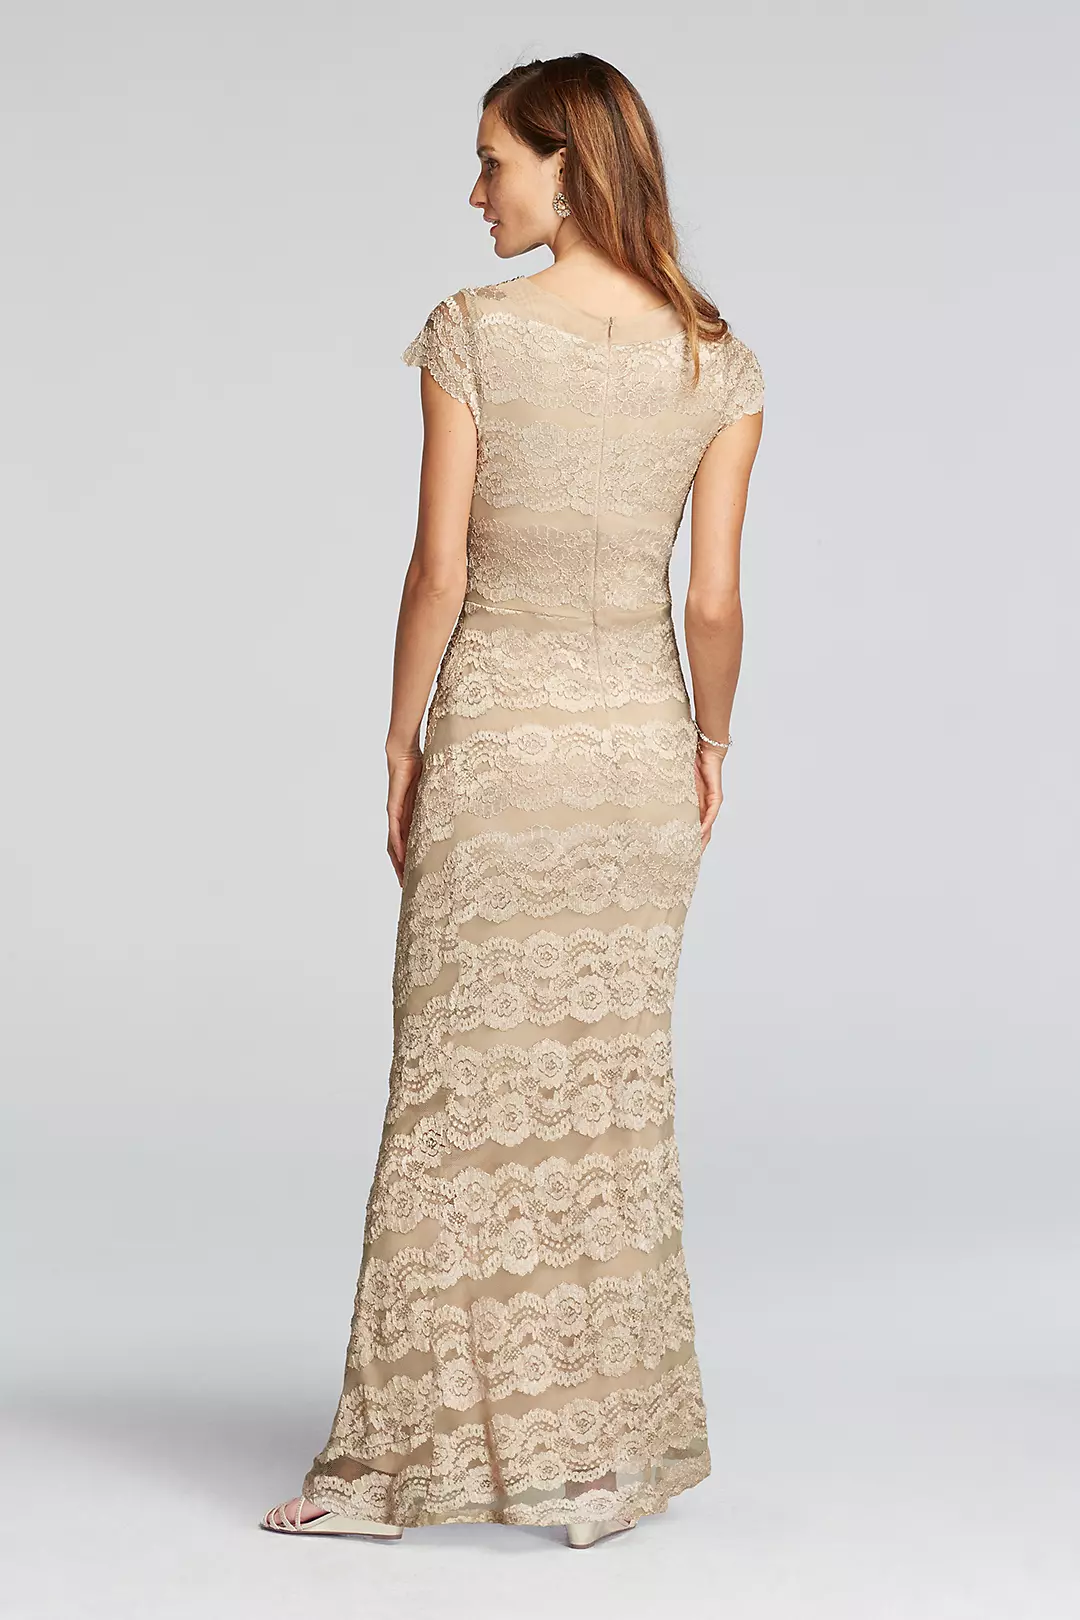 Cap Sleeve Floral Lace Dress with Jeweled Neckline Image 2